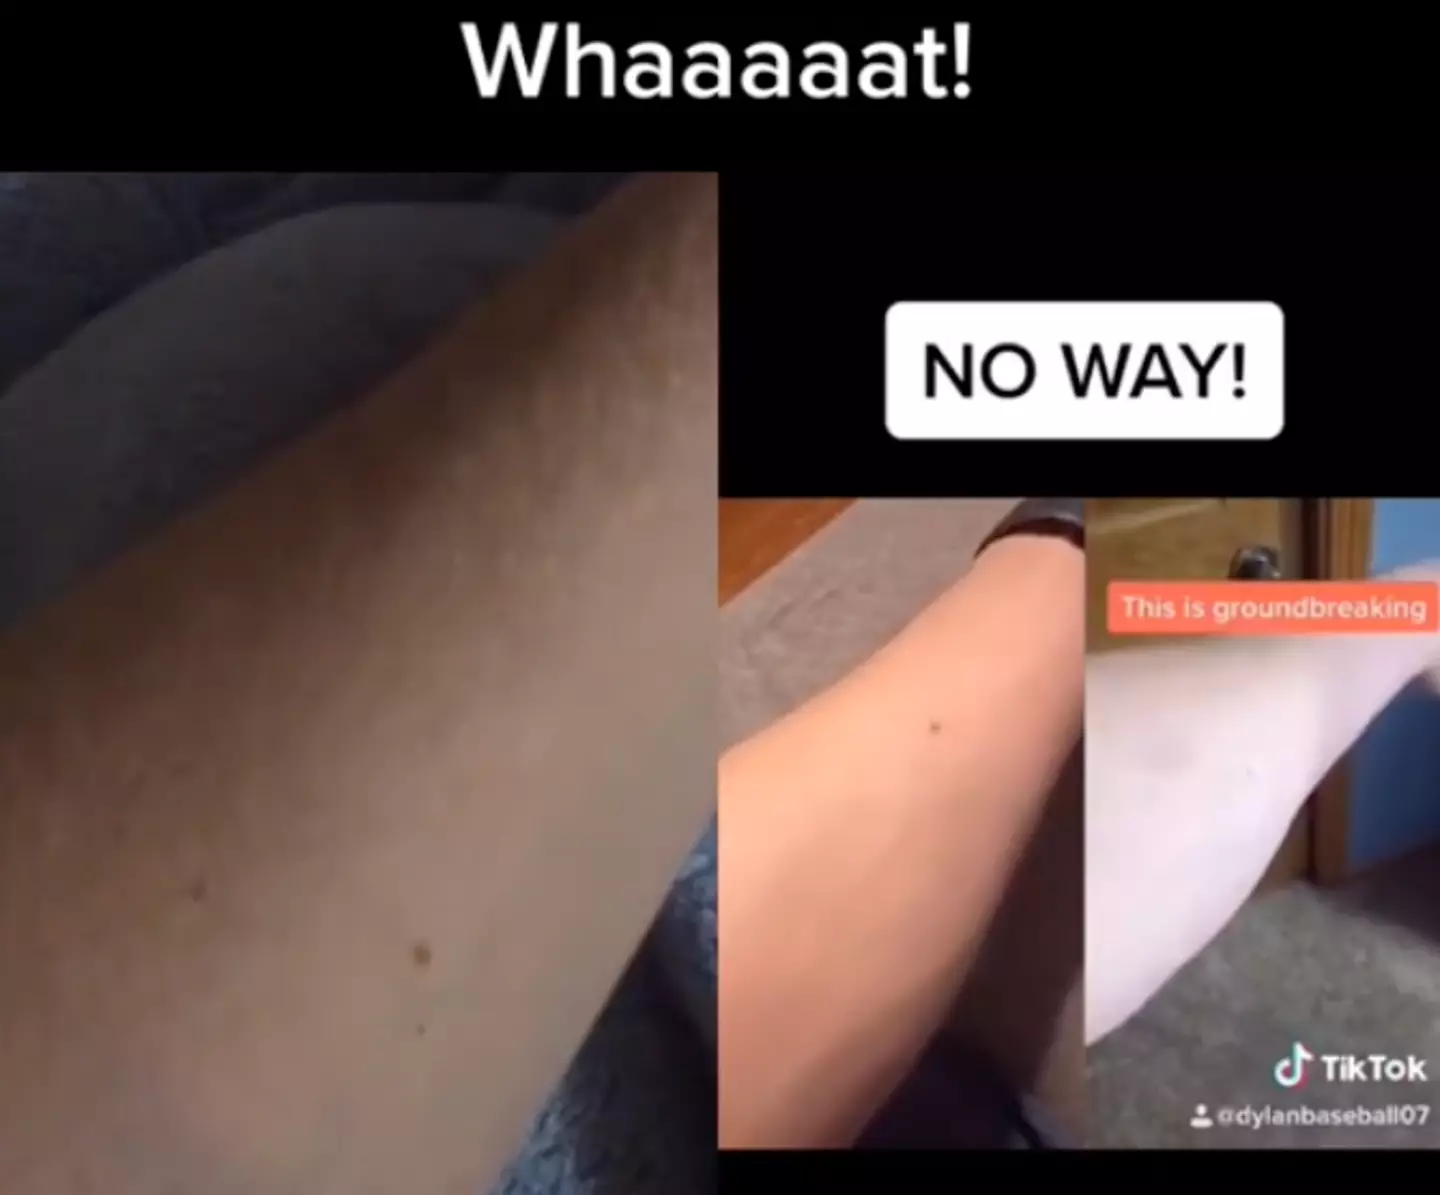 Another TikTok user made a duet to the video and showed his own arm freckle off.